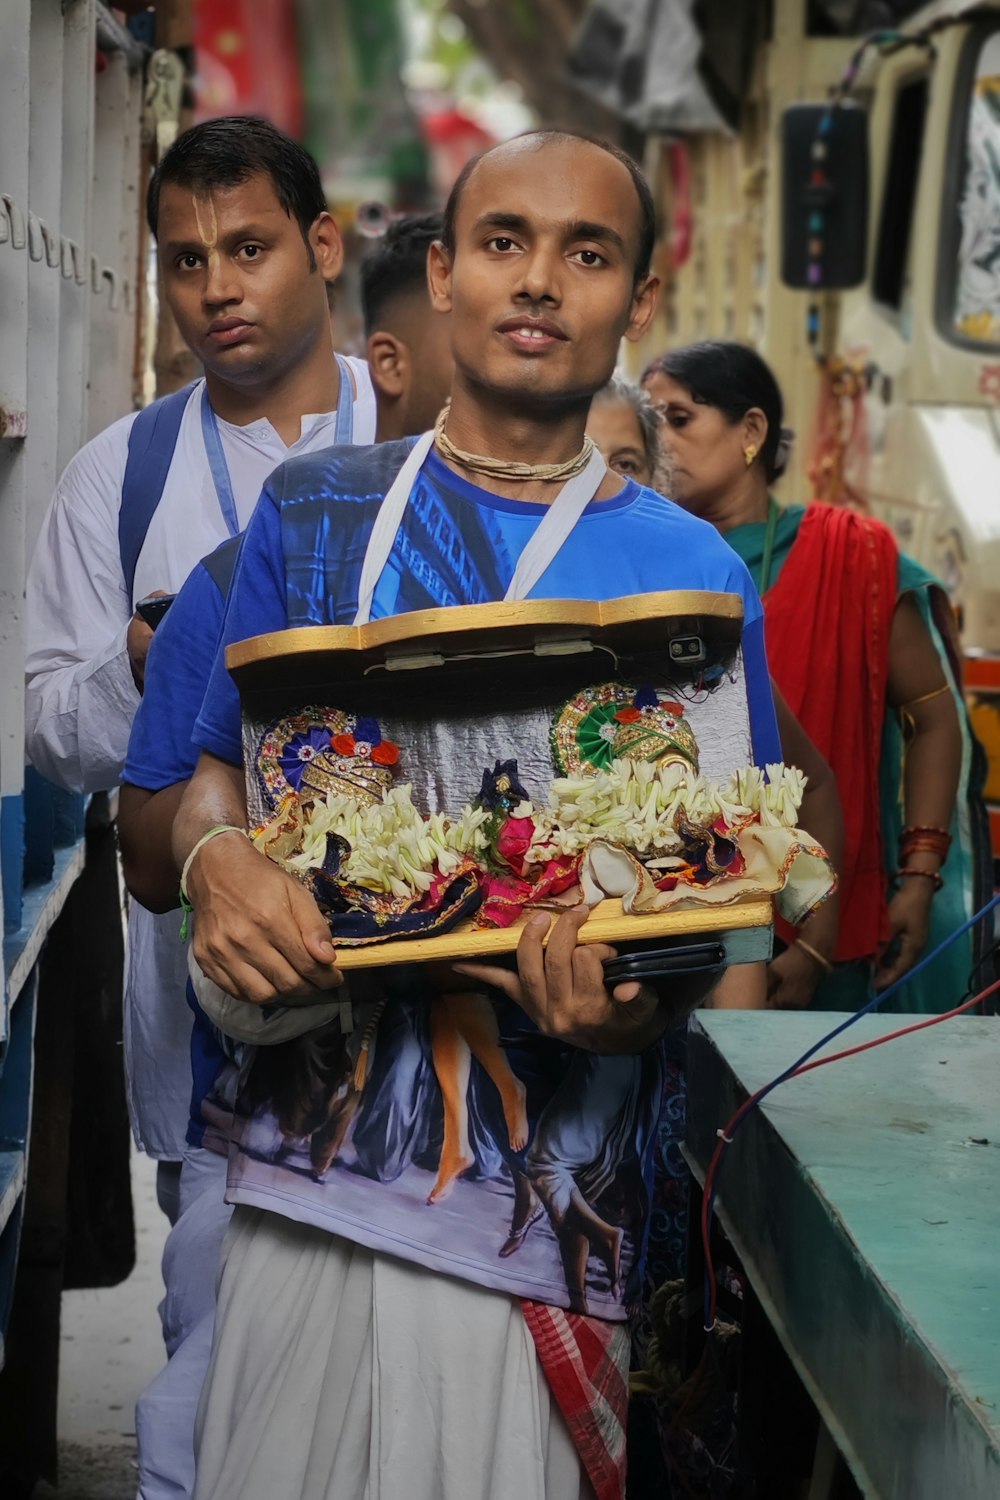 a man holding a tray of food in his hands